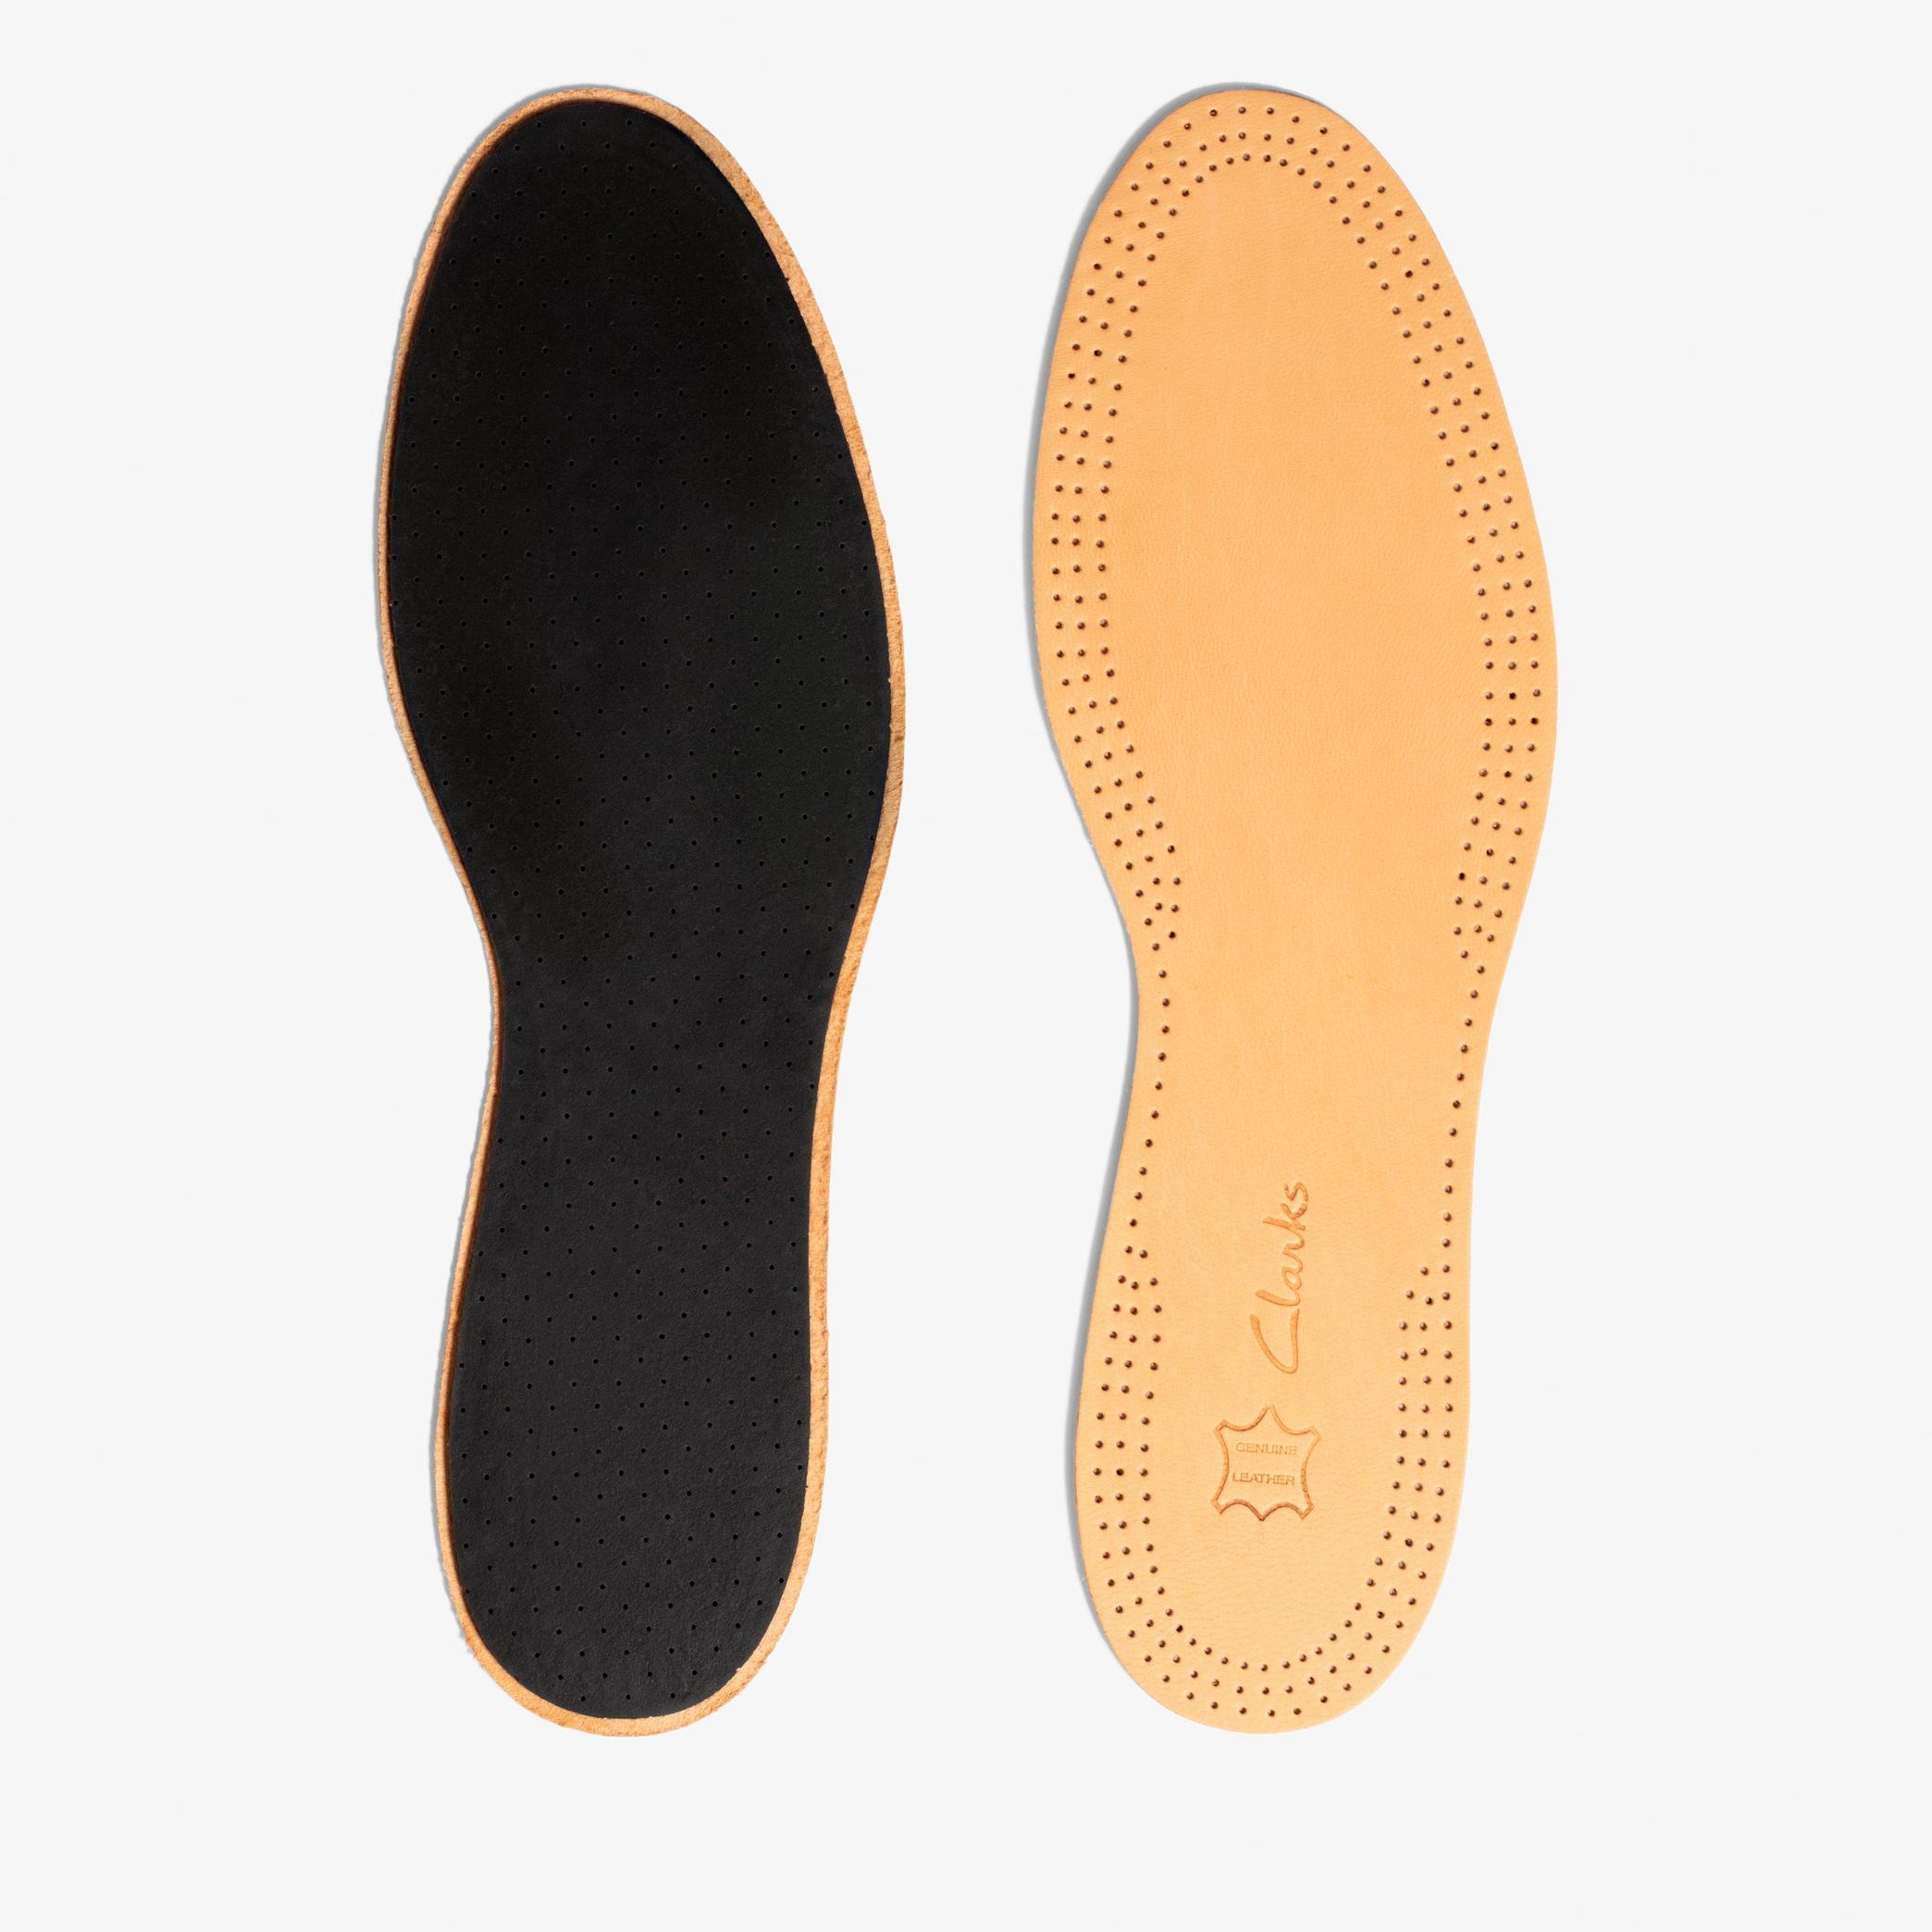 Leather insole size 5  Insoles, view 2 of 3